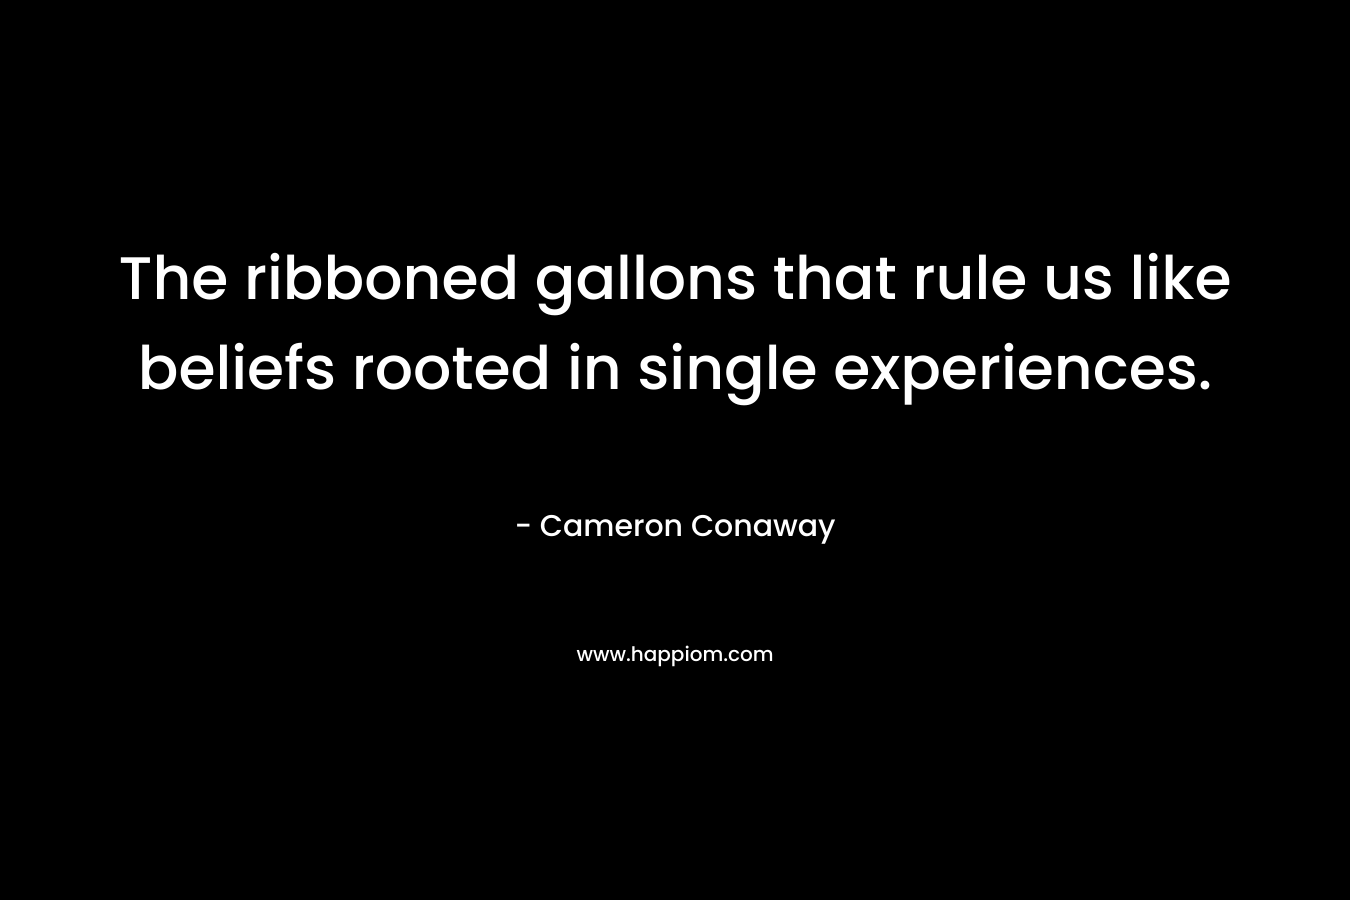 The ribboned gallons that rule us like beliefs rooted in single experiences. – Cameron Conaway